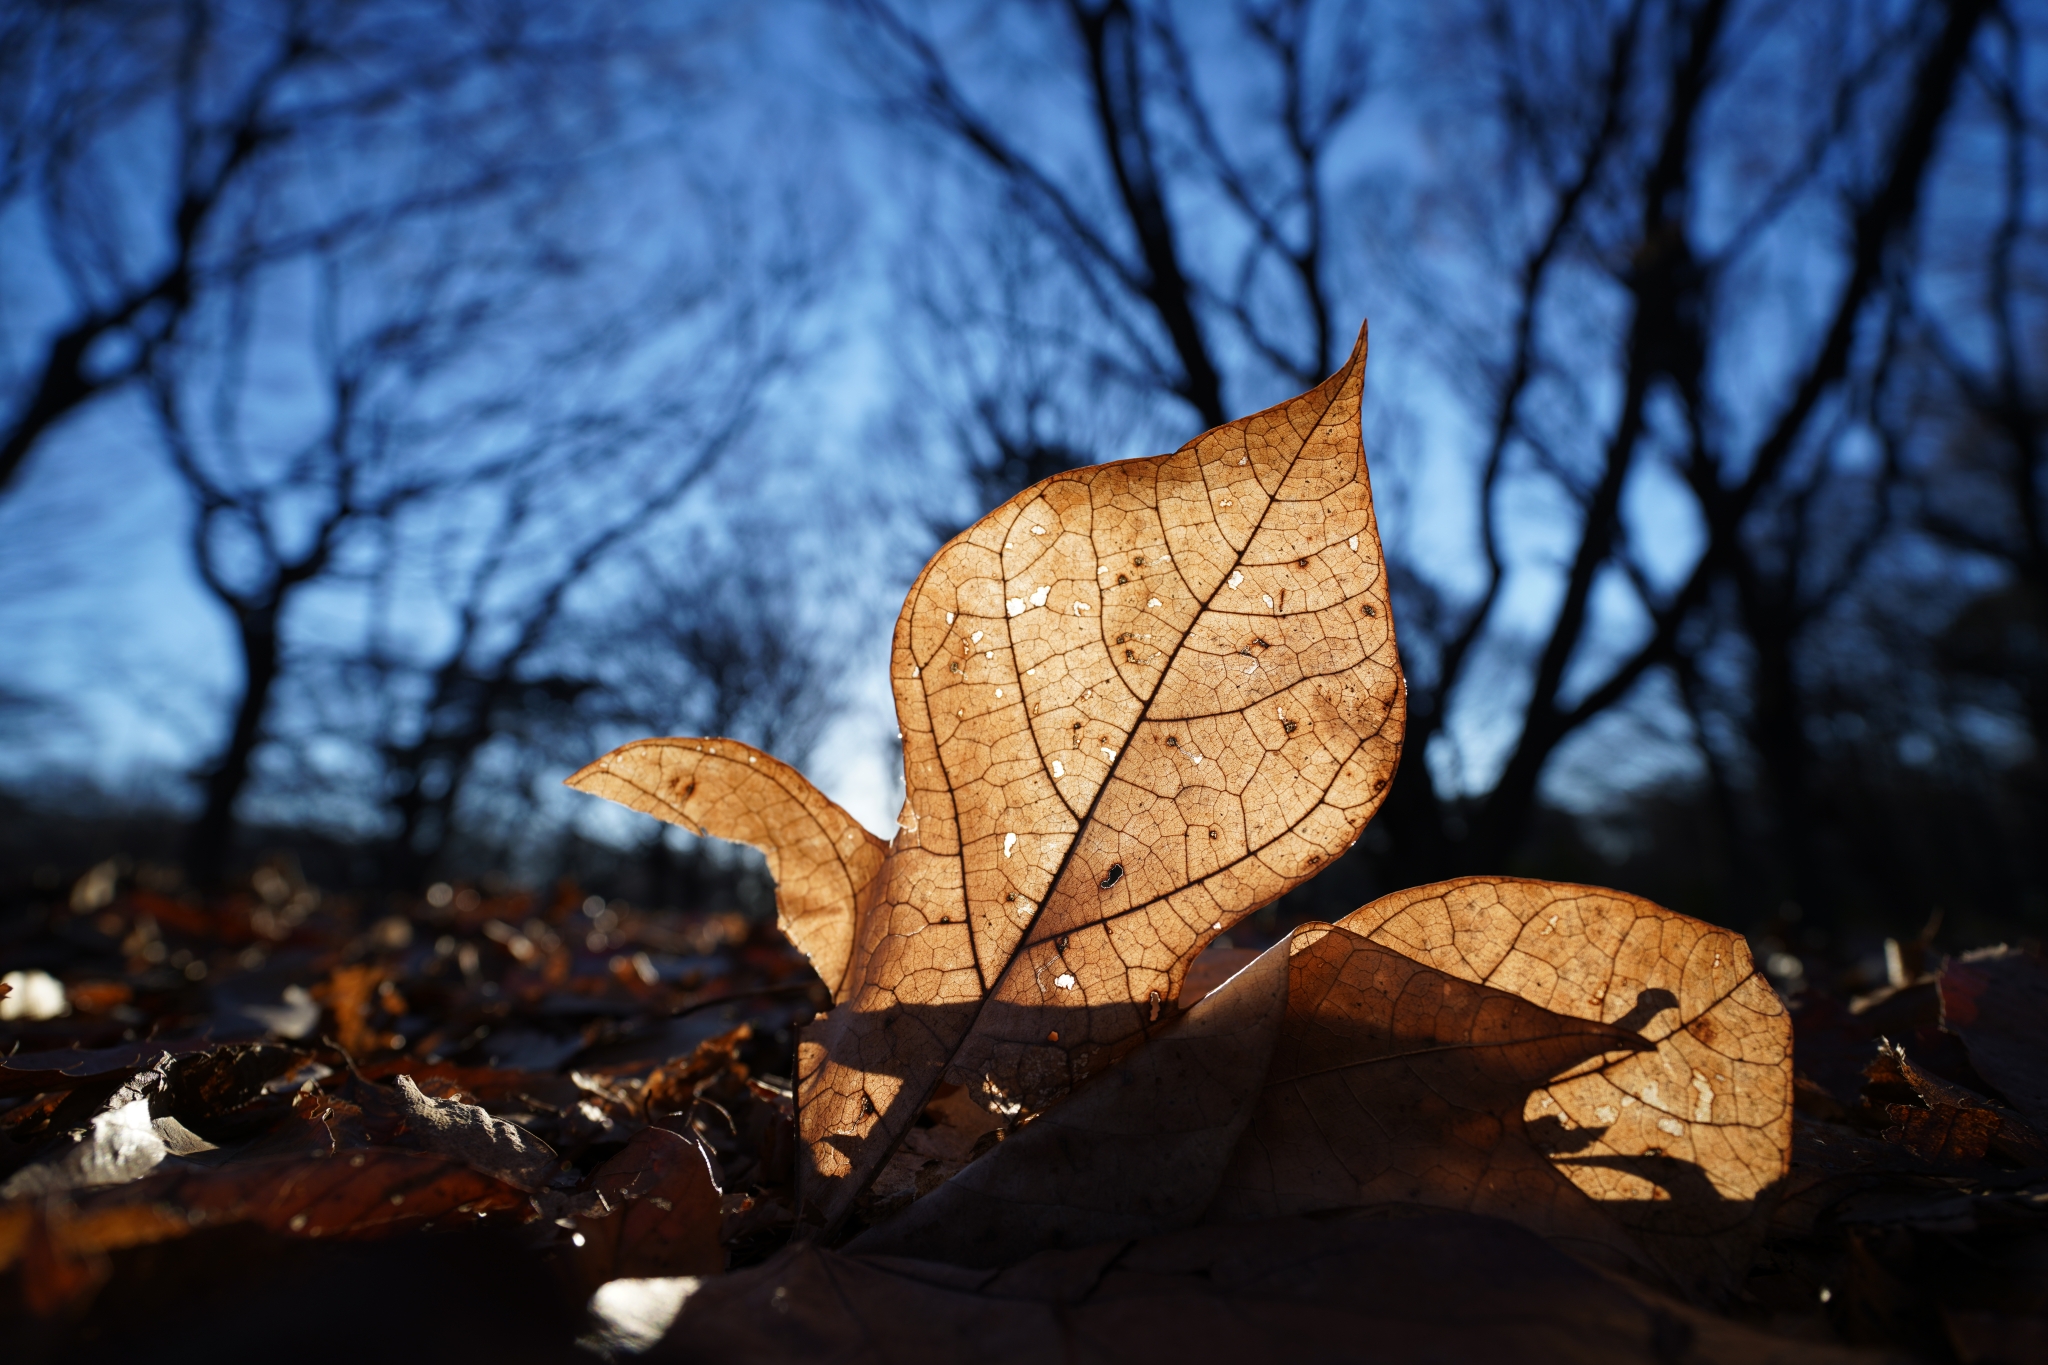 A dry leaf illuminated against the sky with silhouetted trees in the background